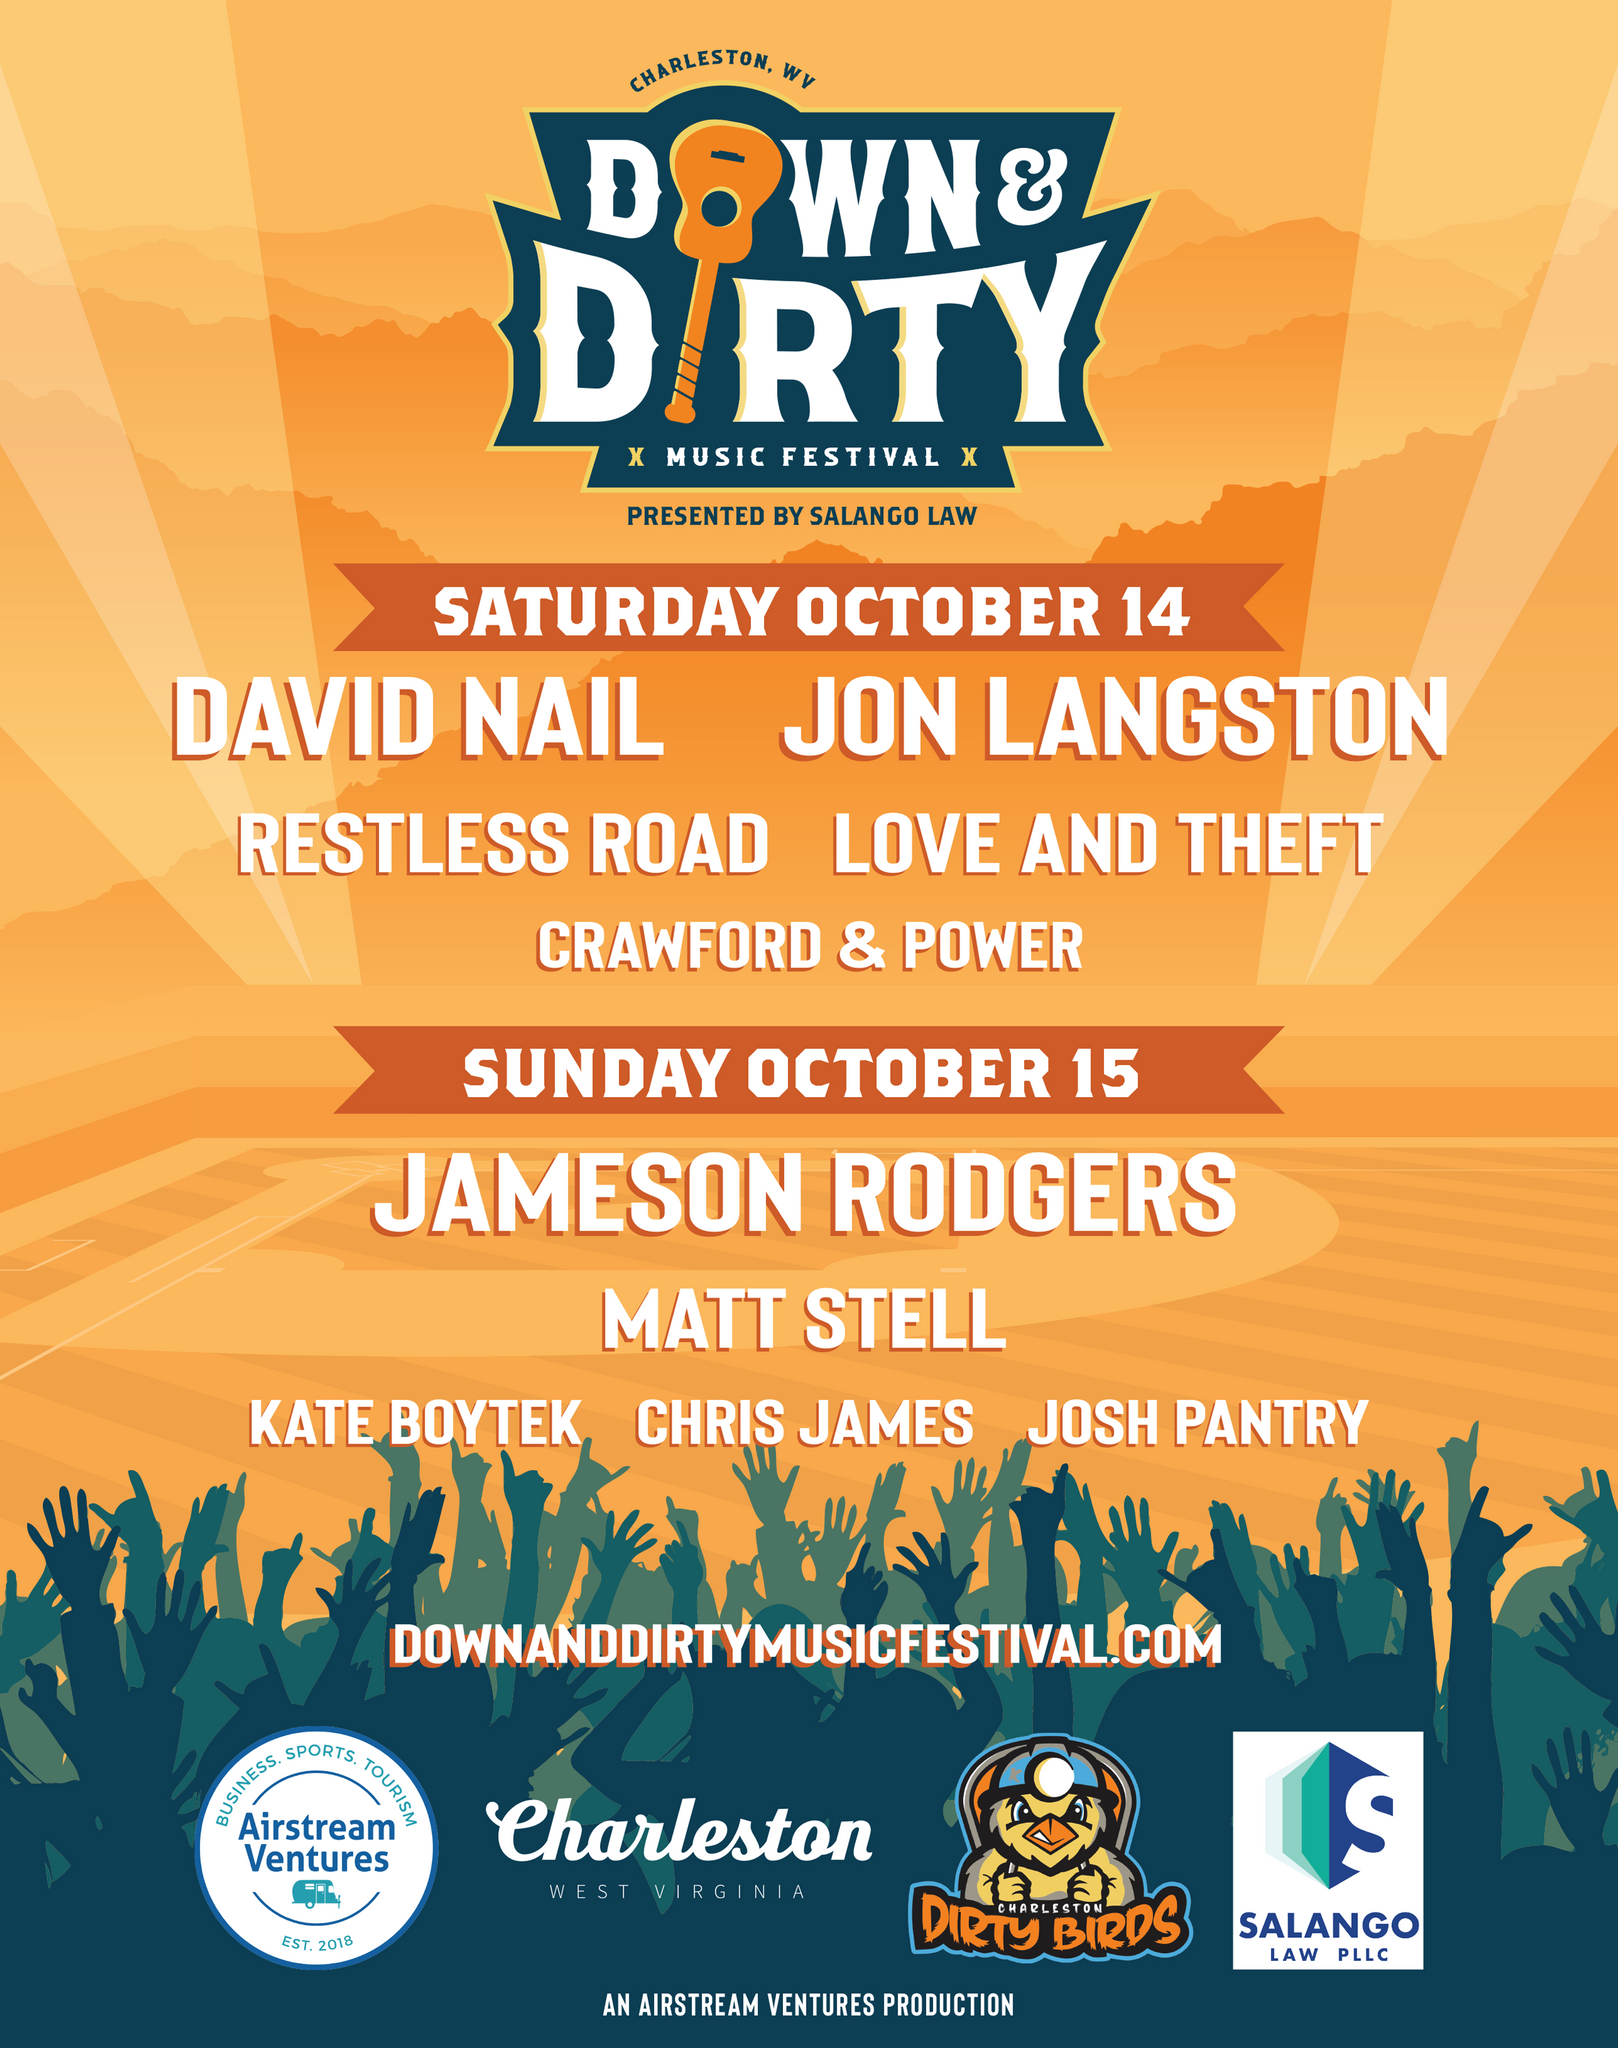 ACM AWARD NOMINEES DAVID NAIL AND JAMESON ROGERS HEADLINE SALANGO LAW DOWN AND DIRTY MUSIC FESTIVAL